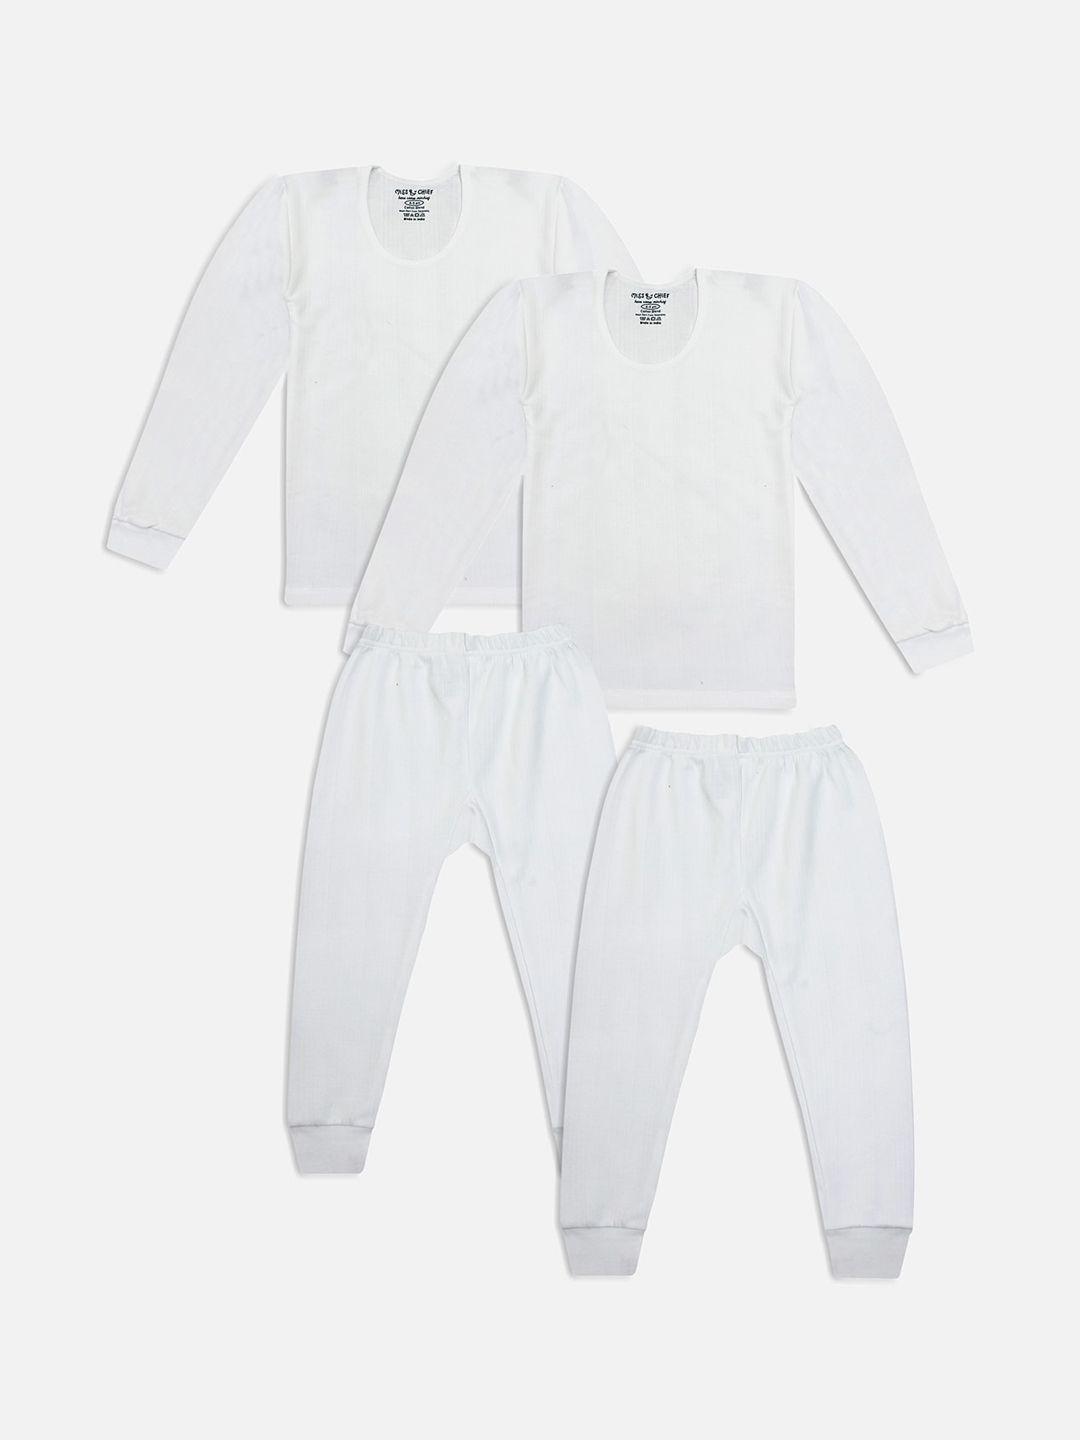 miss & chief kids pack of 2 off-white striped thermal sets